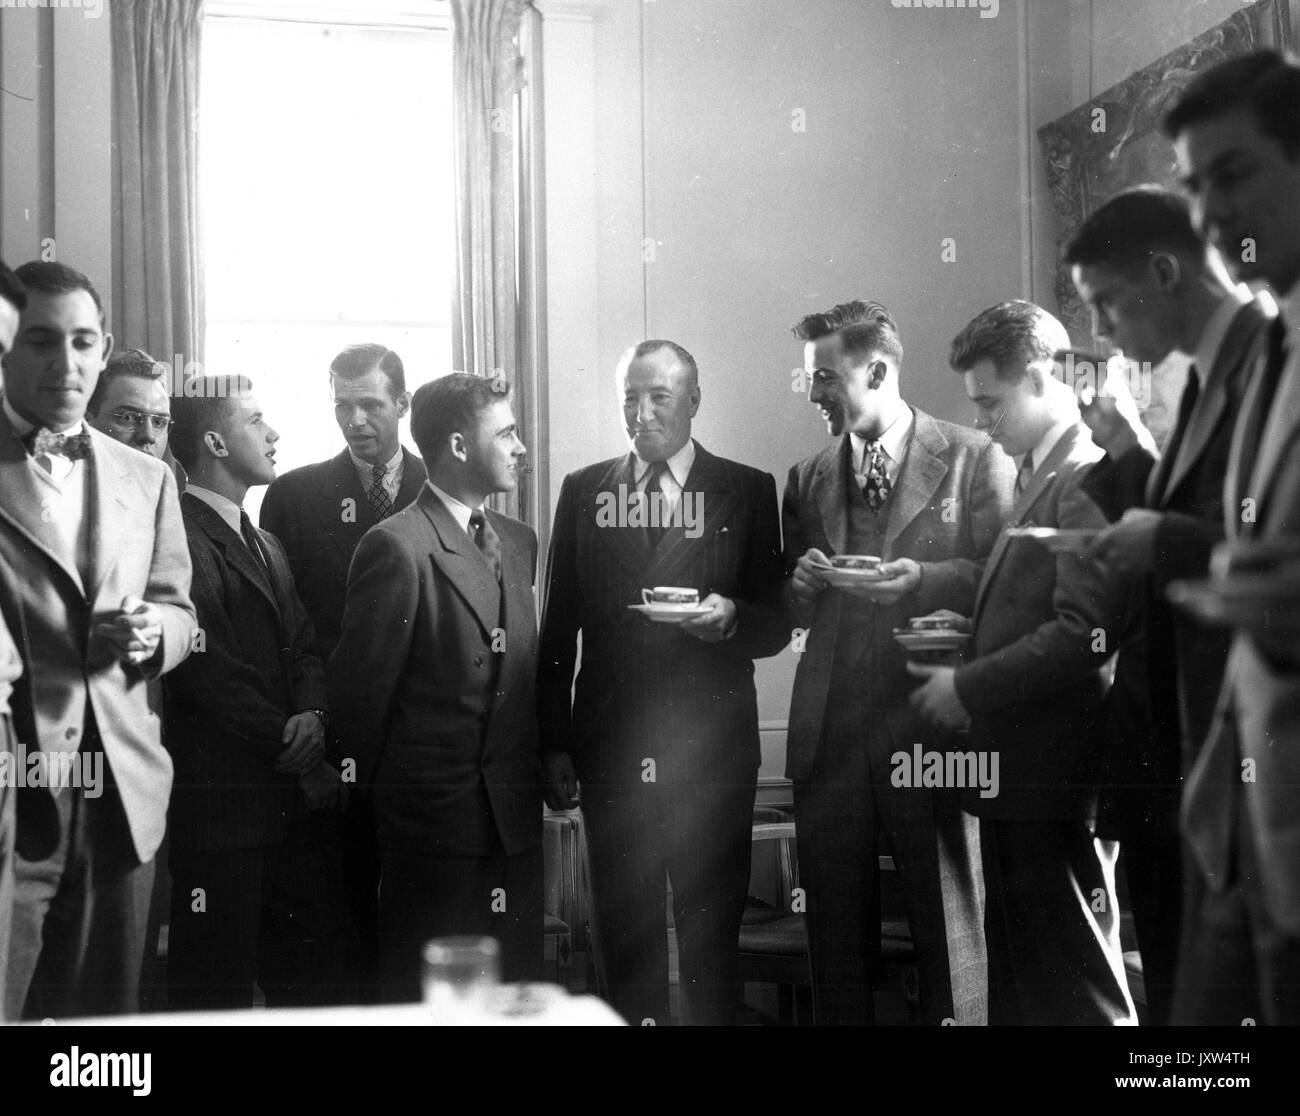 Commemoration Day, Clark Kerr, Archibald John Kerr, Inverchapel, Lord, Hiss, Alger Inverchapel [Clark Kerr], Hiss and unidentified others drinking from cups and talking, Hiss to right of Inverchapel, 1947. Stock Photo